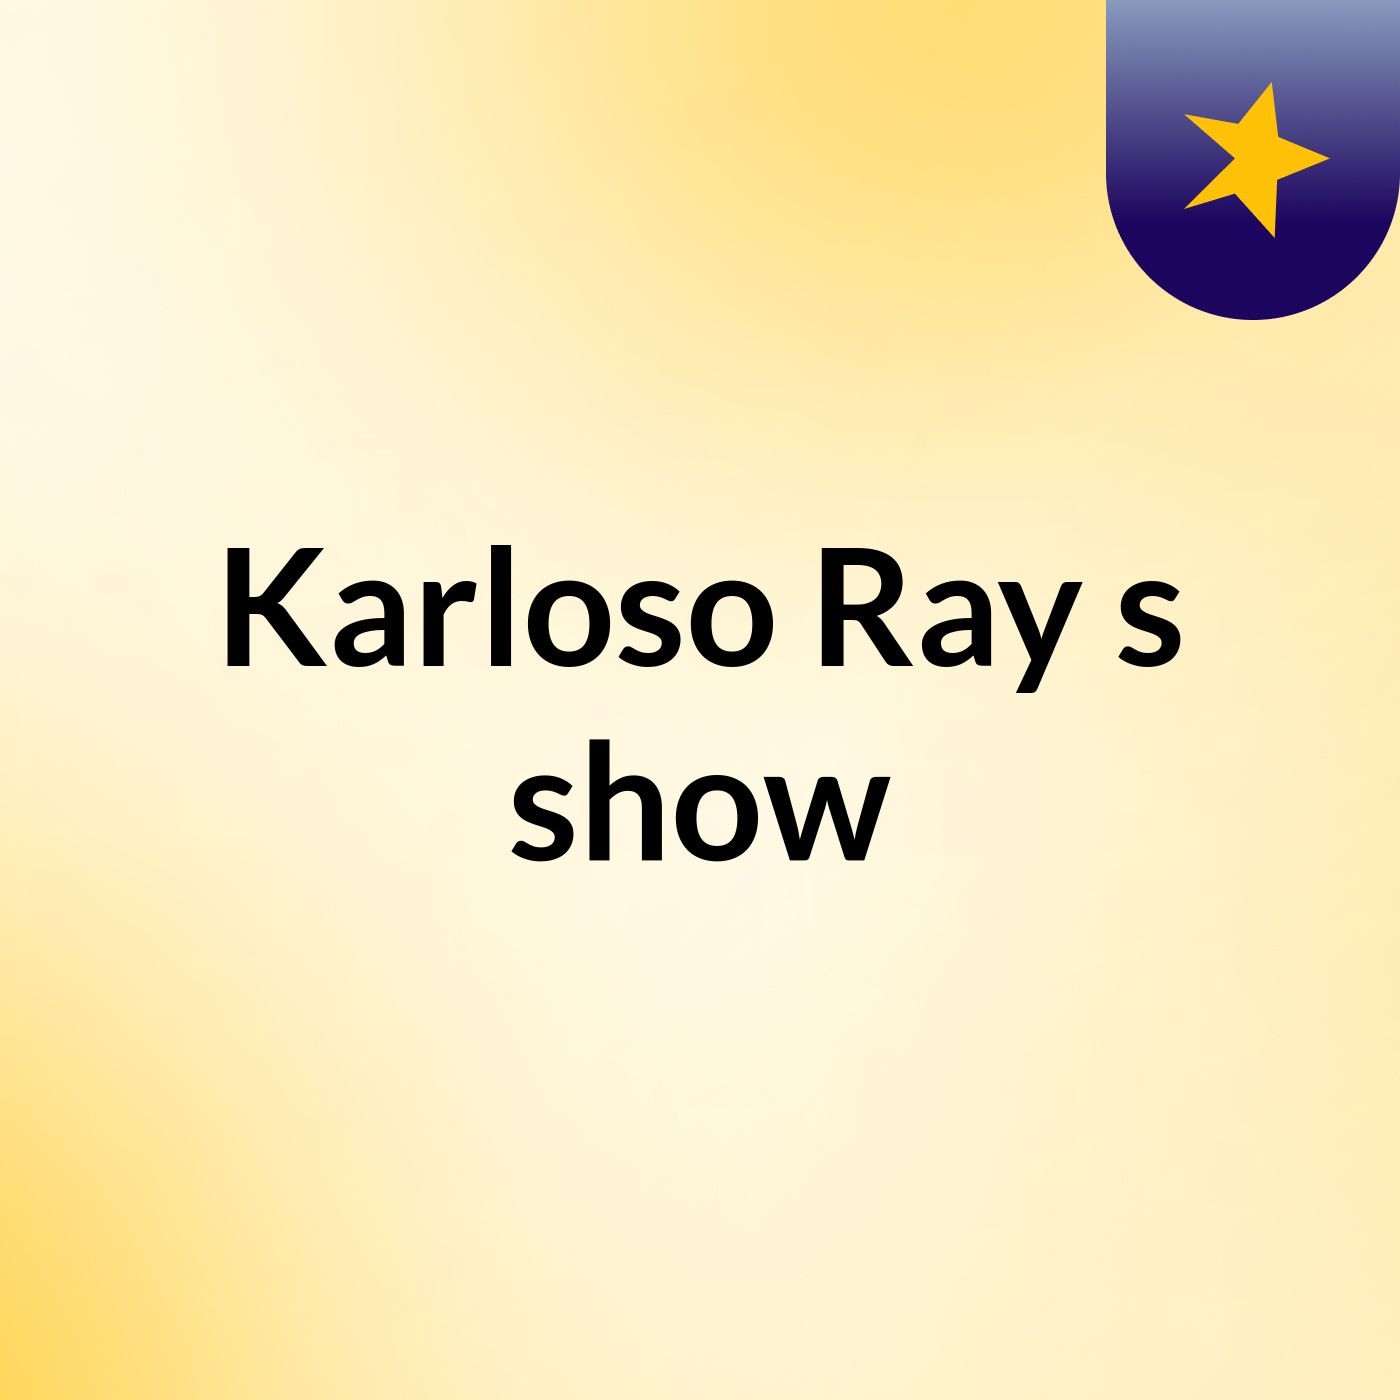 Karloso Ray's show